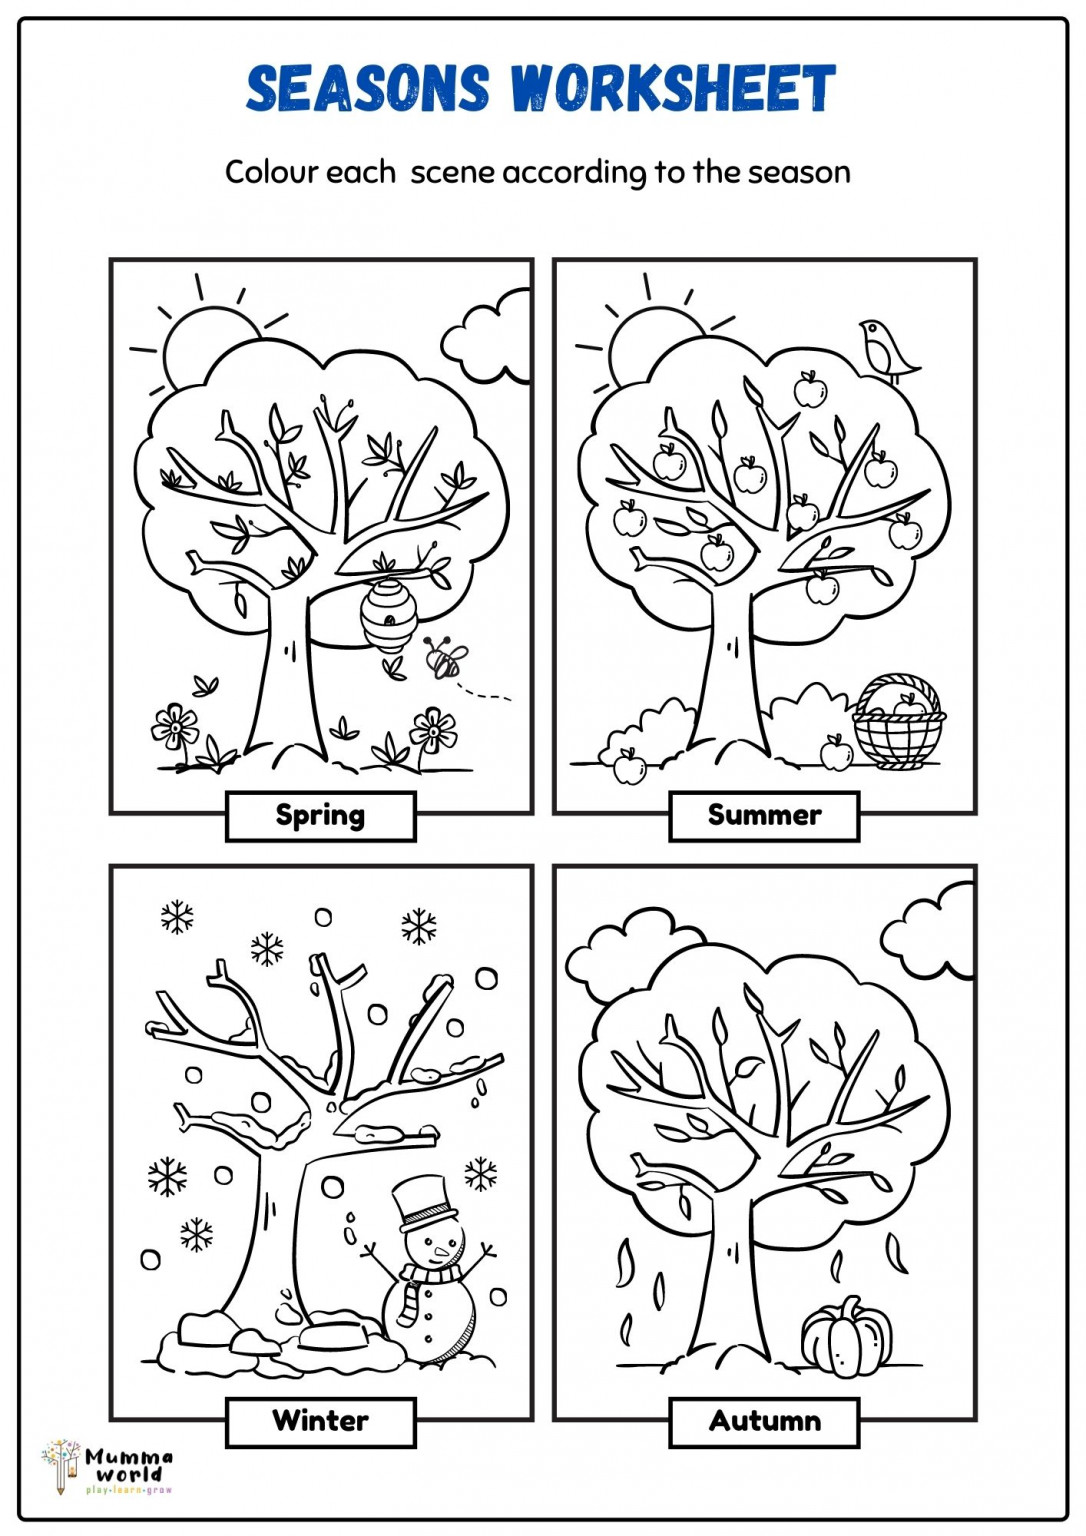 coloring-pages-seasons-of-the-year-boringpop